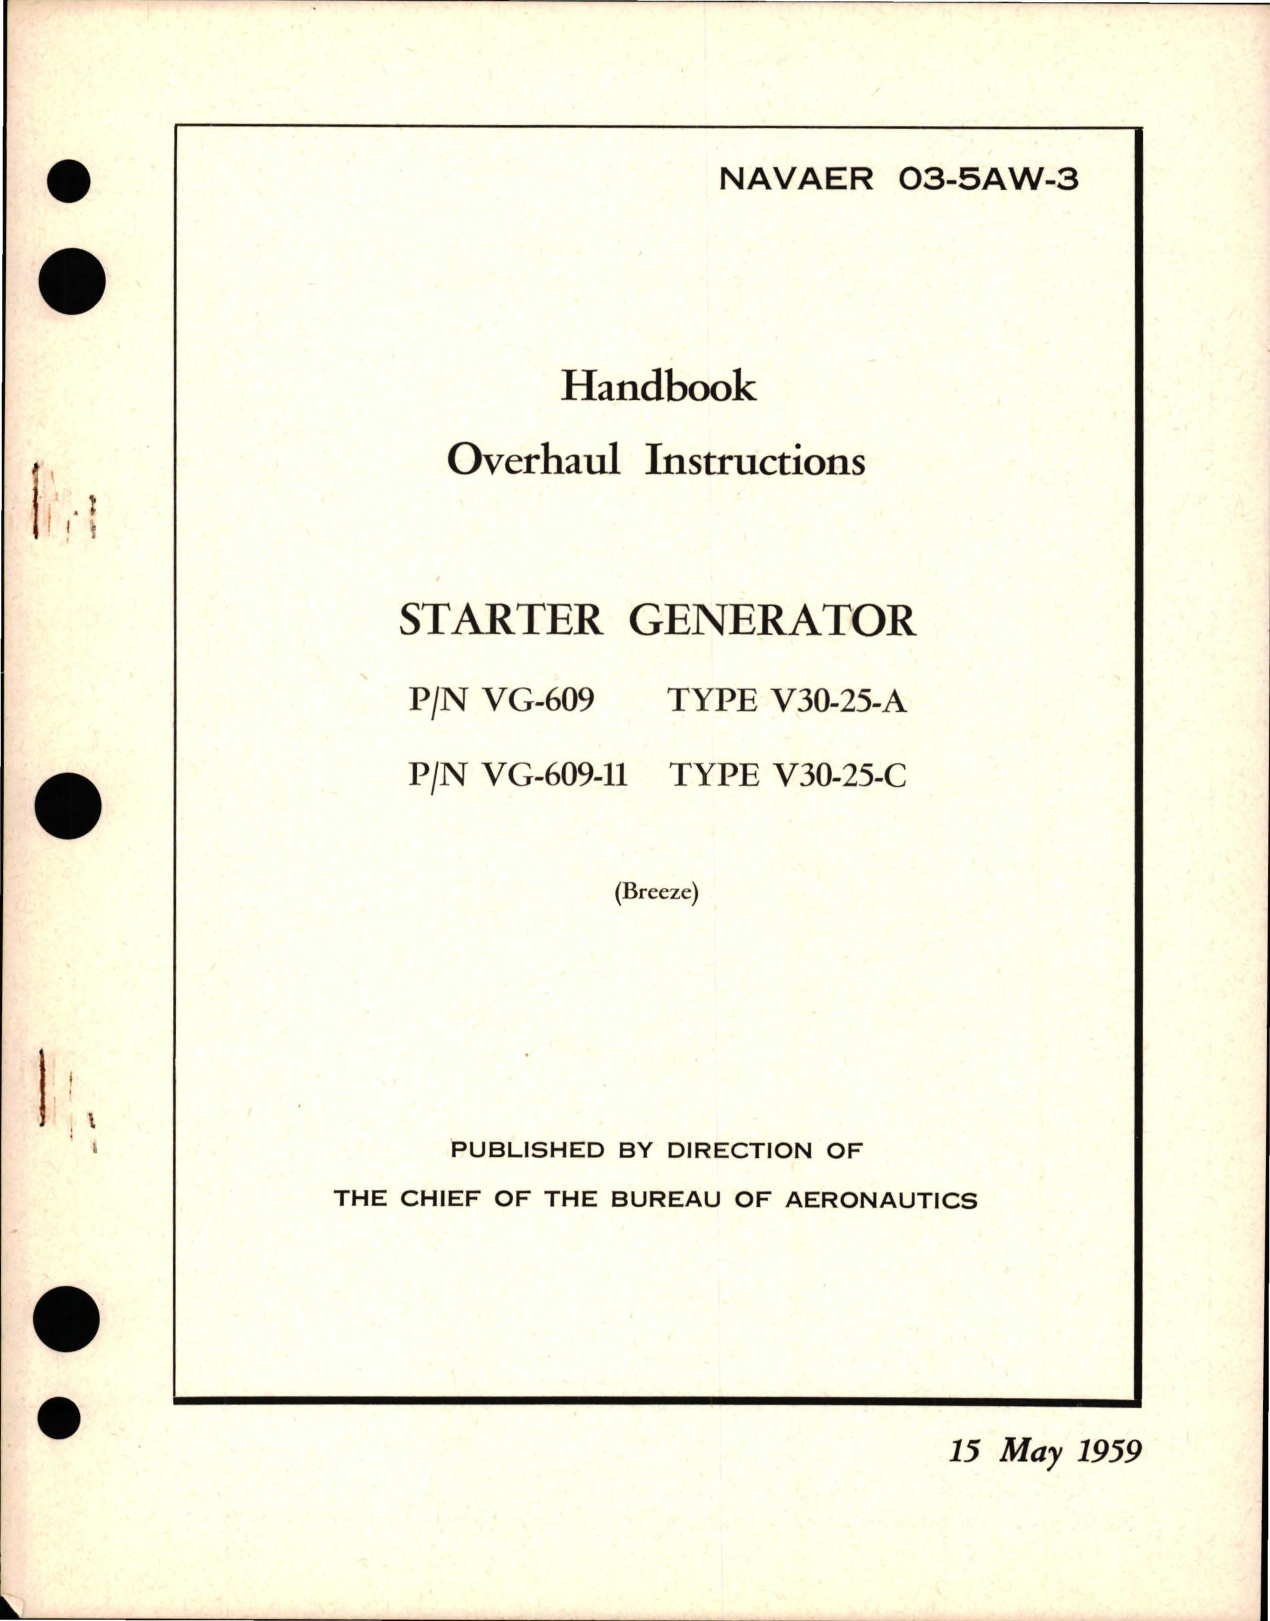 Sample page 1 from AirCorps Library document: Overhaul Instructions for Starter Generator - Parts VG-609, VG-609-11 - Types V30-25-A, V30-25-C